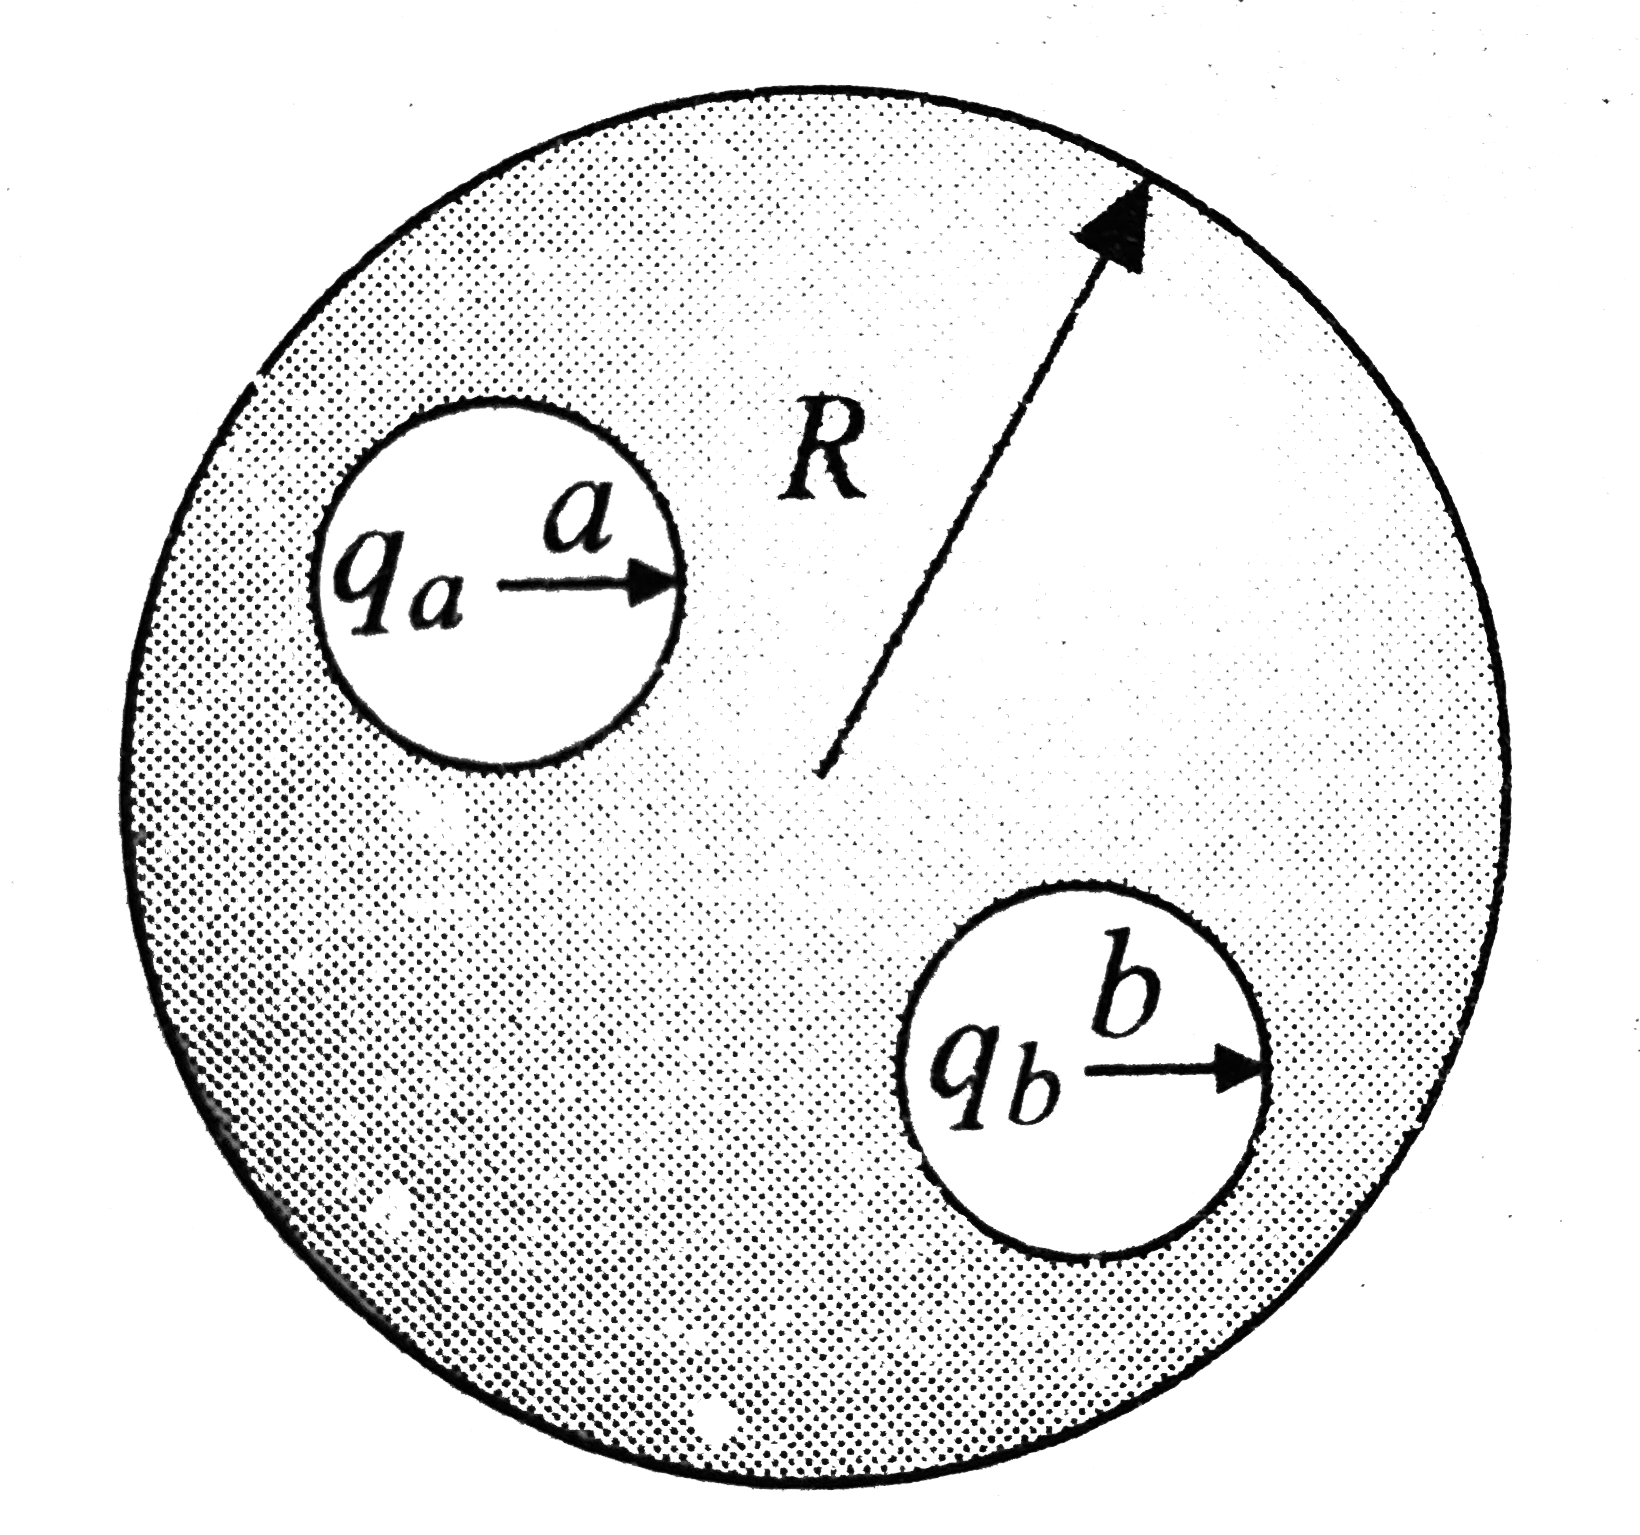 Two spherical cavities of radii a and b are hollowed out from the interior of a neutral conducting sphere of radius R. At the center of each cavity , a point charge is placed . Call these charges q(a) and q(b).   The electric field inside the cavity of radius a at a distance r from the center of cavity is